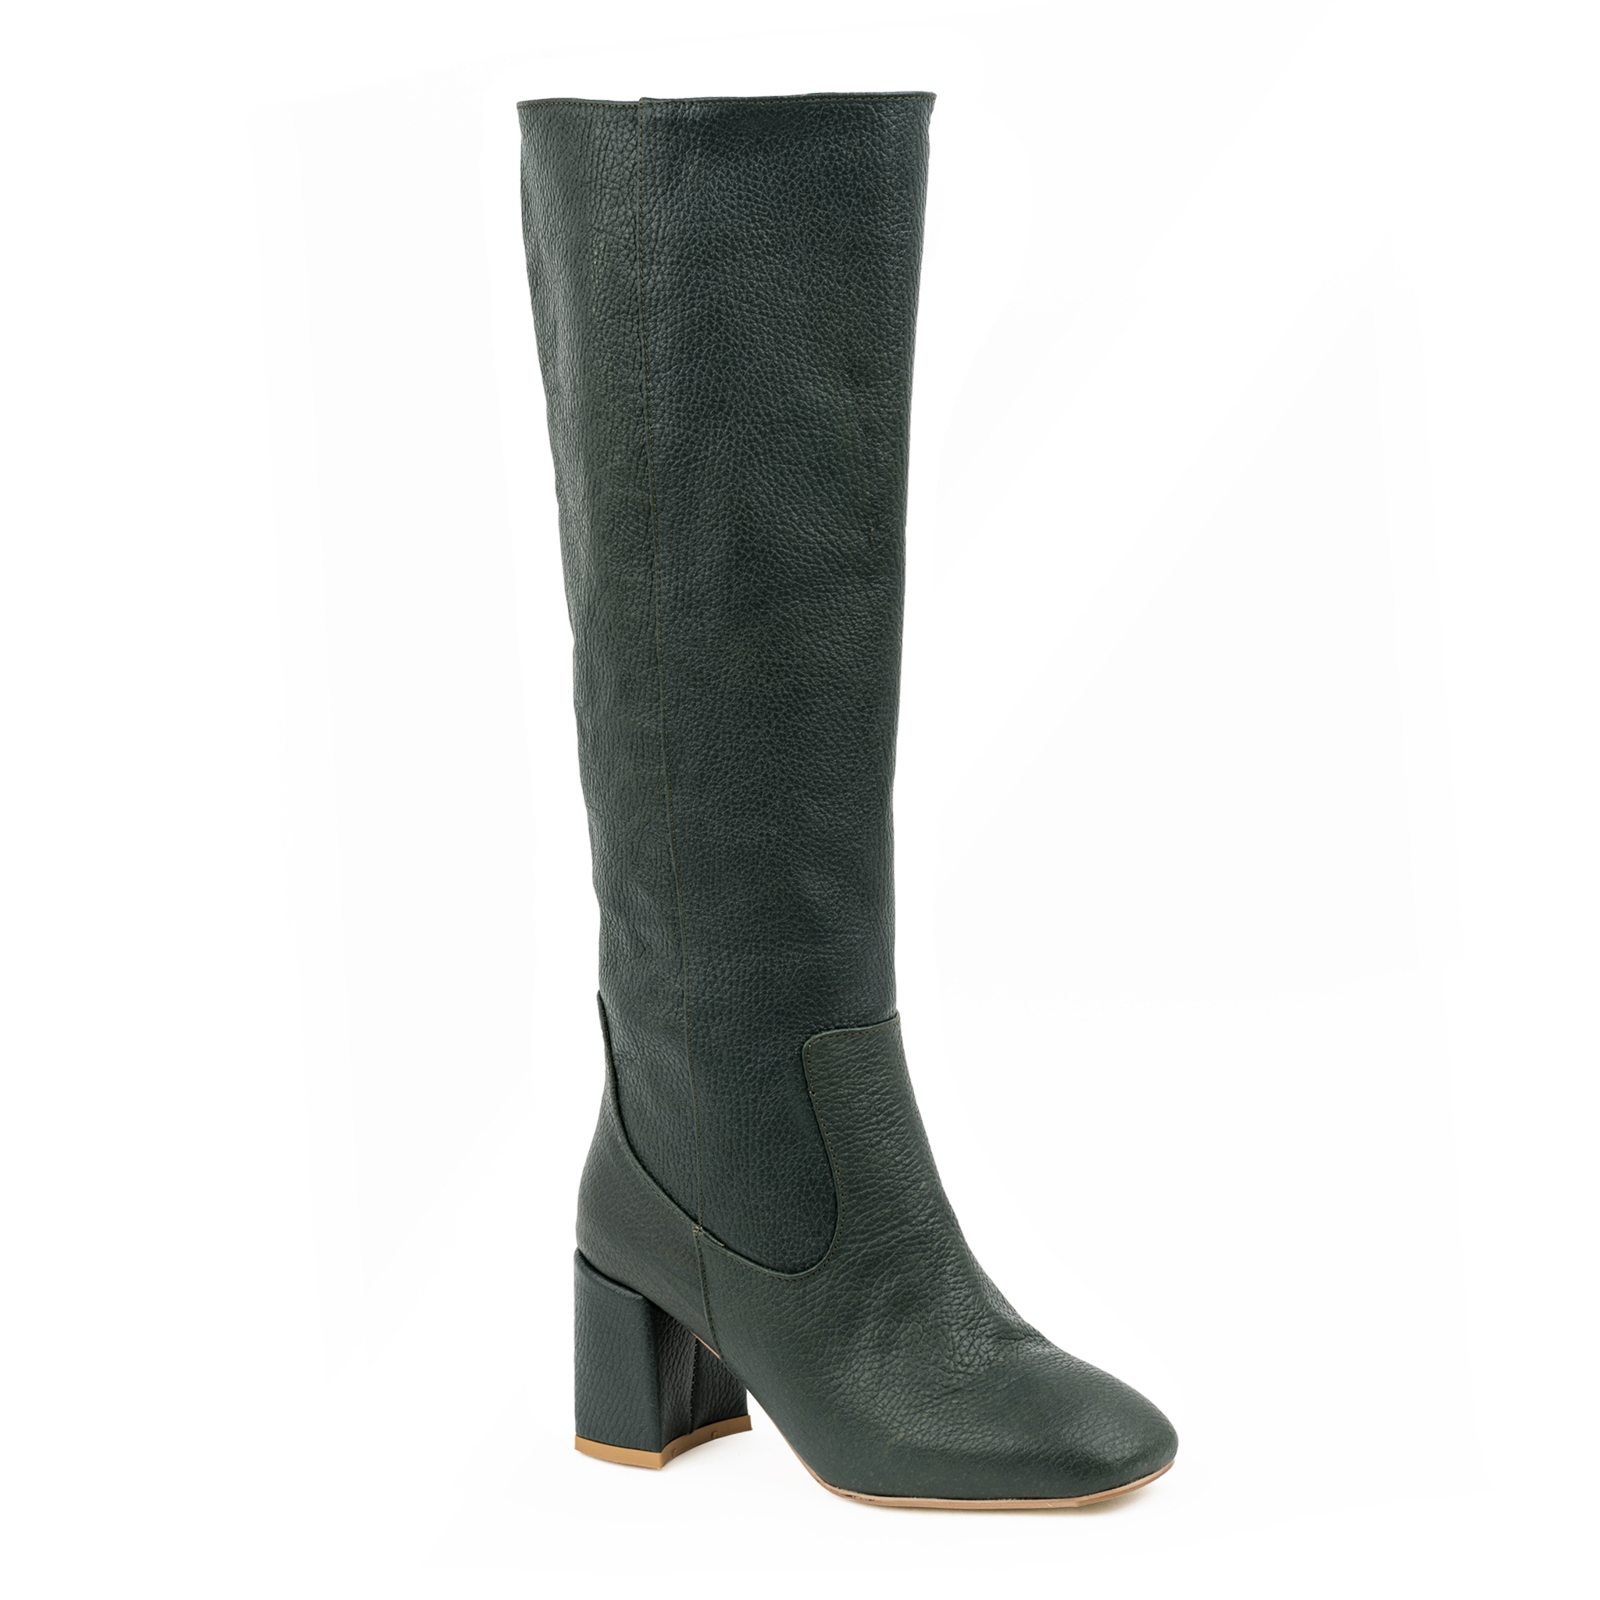 LEATHER HIGH BOOTS WITH BLOCK HEEL - GREEN